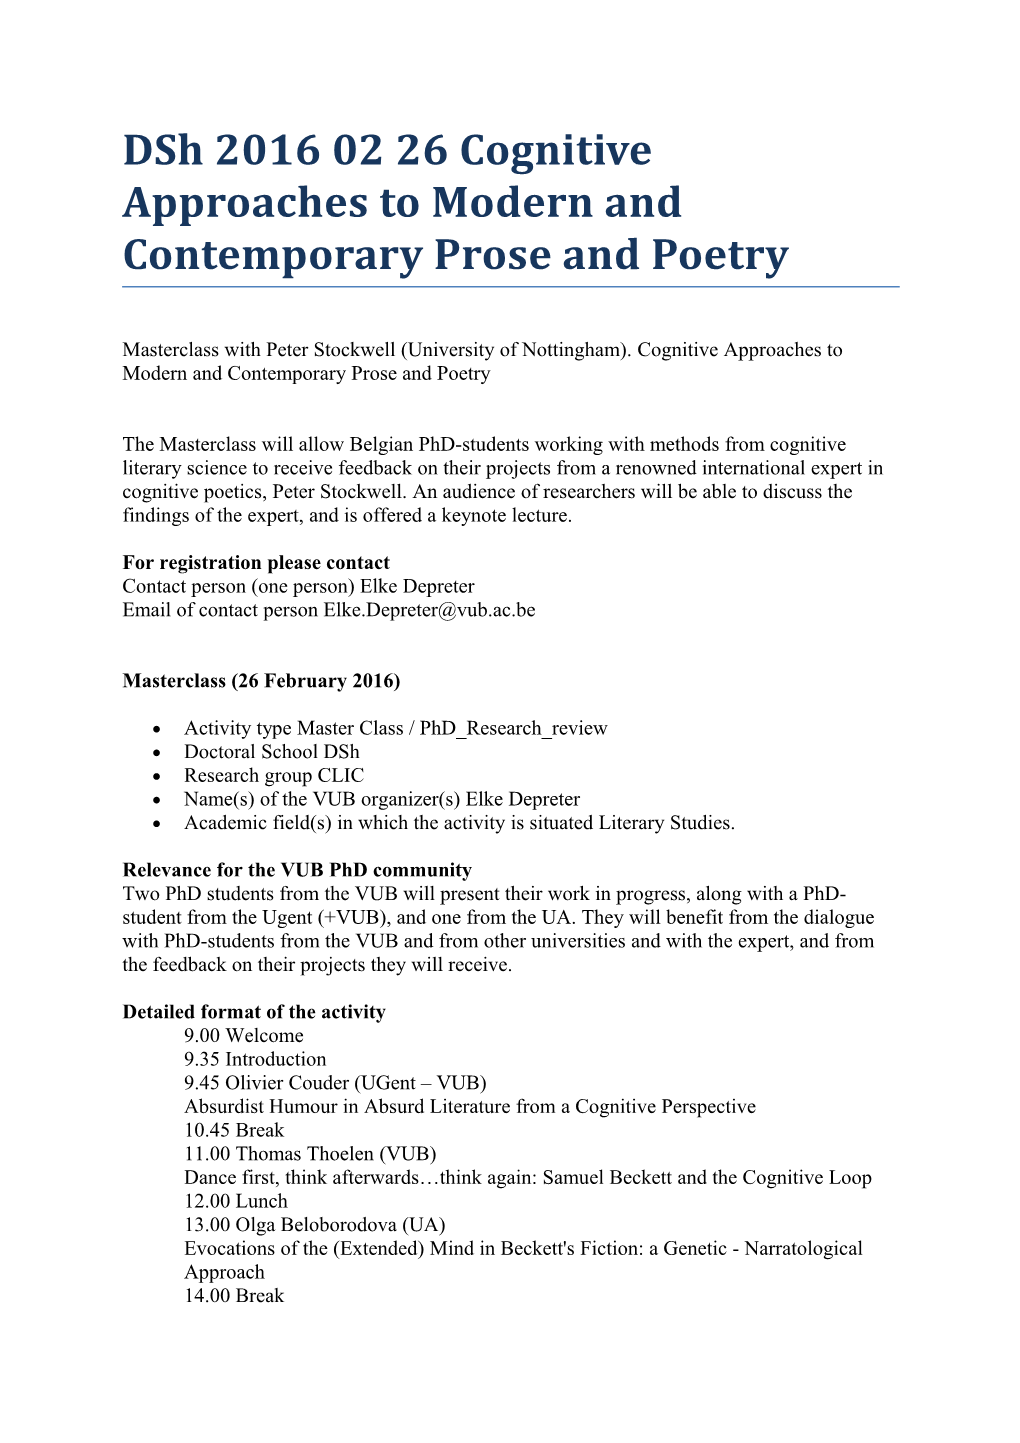 Dsh 2016 02 26 Cognitive Approaches to Modern and Contemporary Prose and Poetry